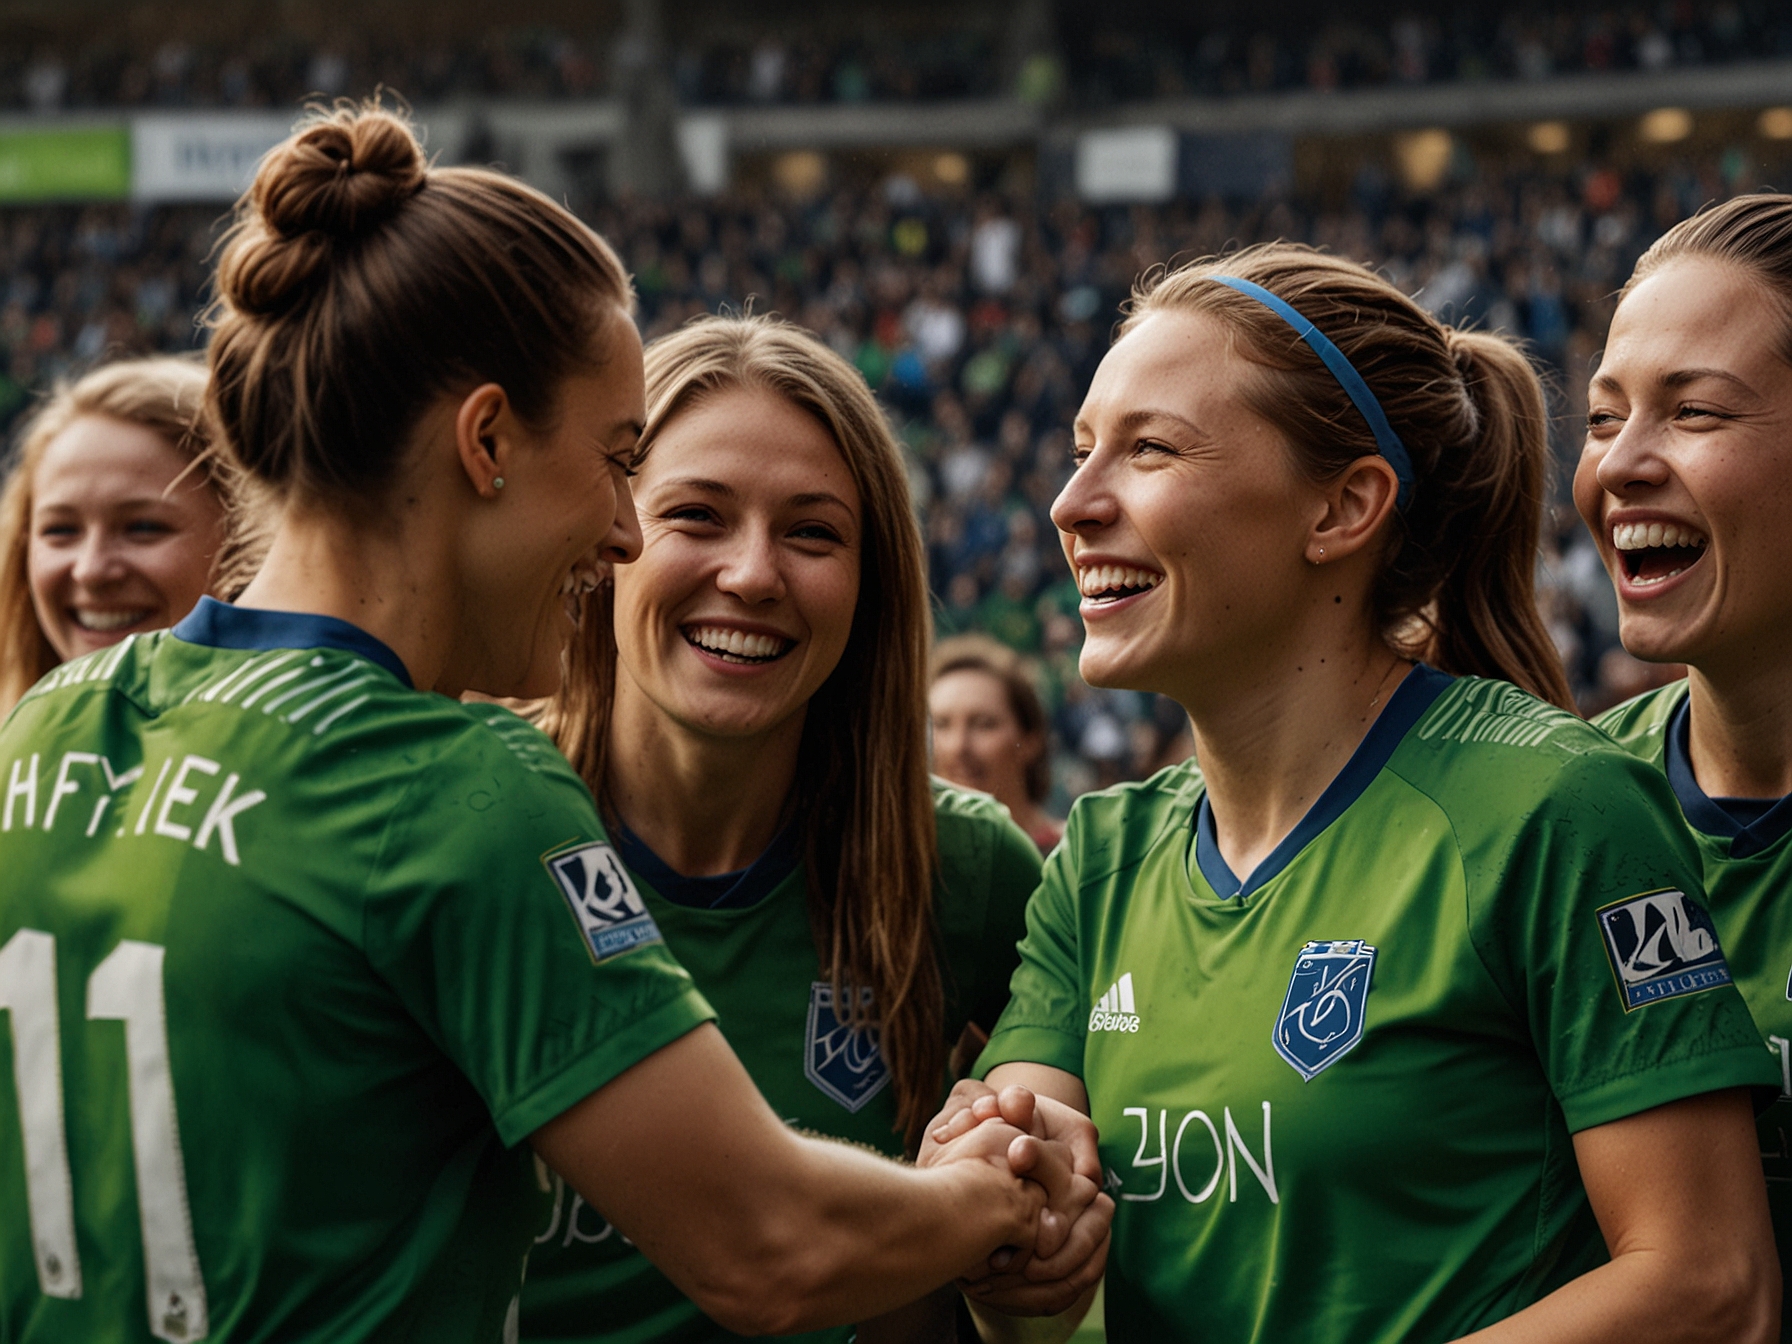 A close-up shot of the Sounders and Reign FC team members celebrating the finalized deal with a handshake and smiles.